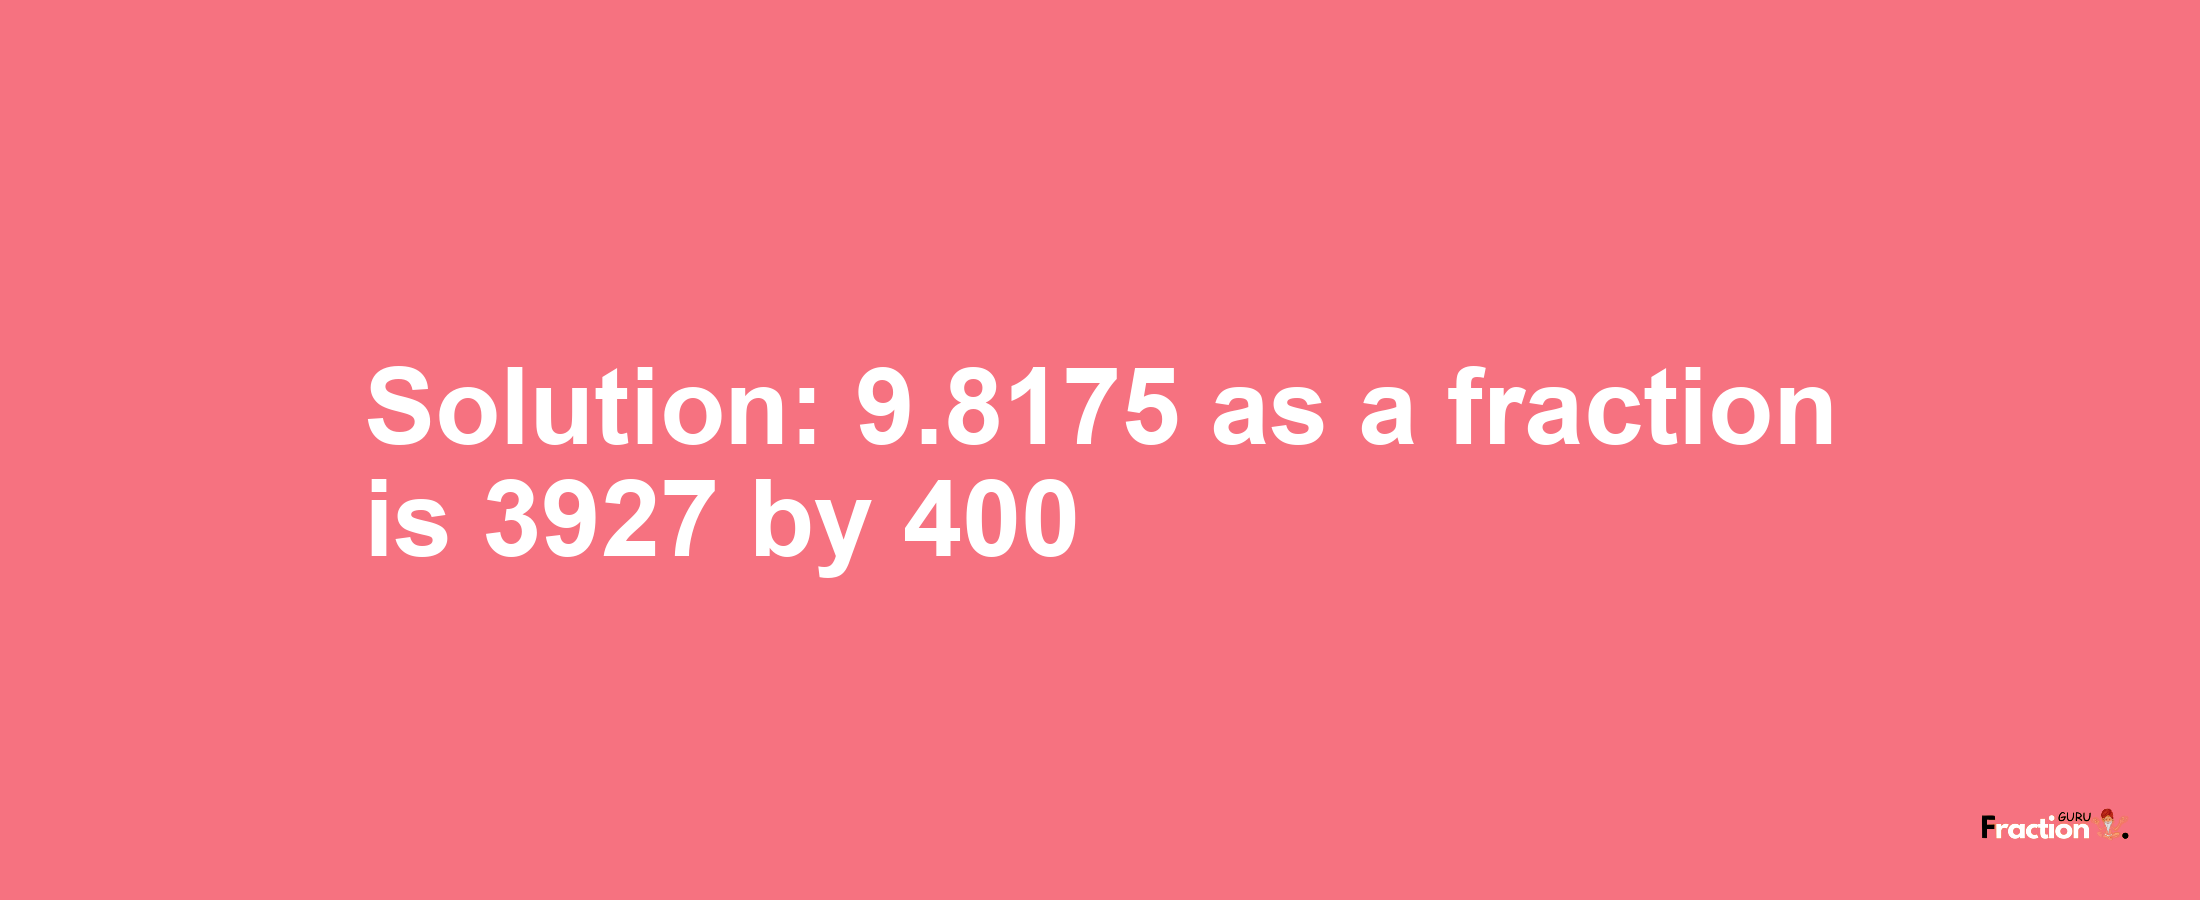 Solution:9.8175 as a fraction is 3927/400